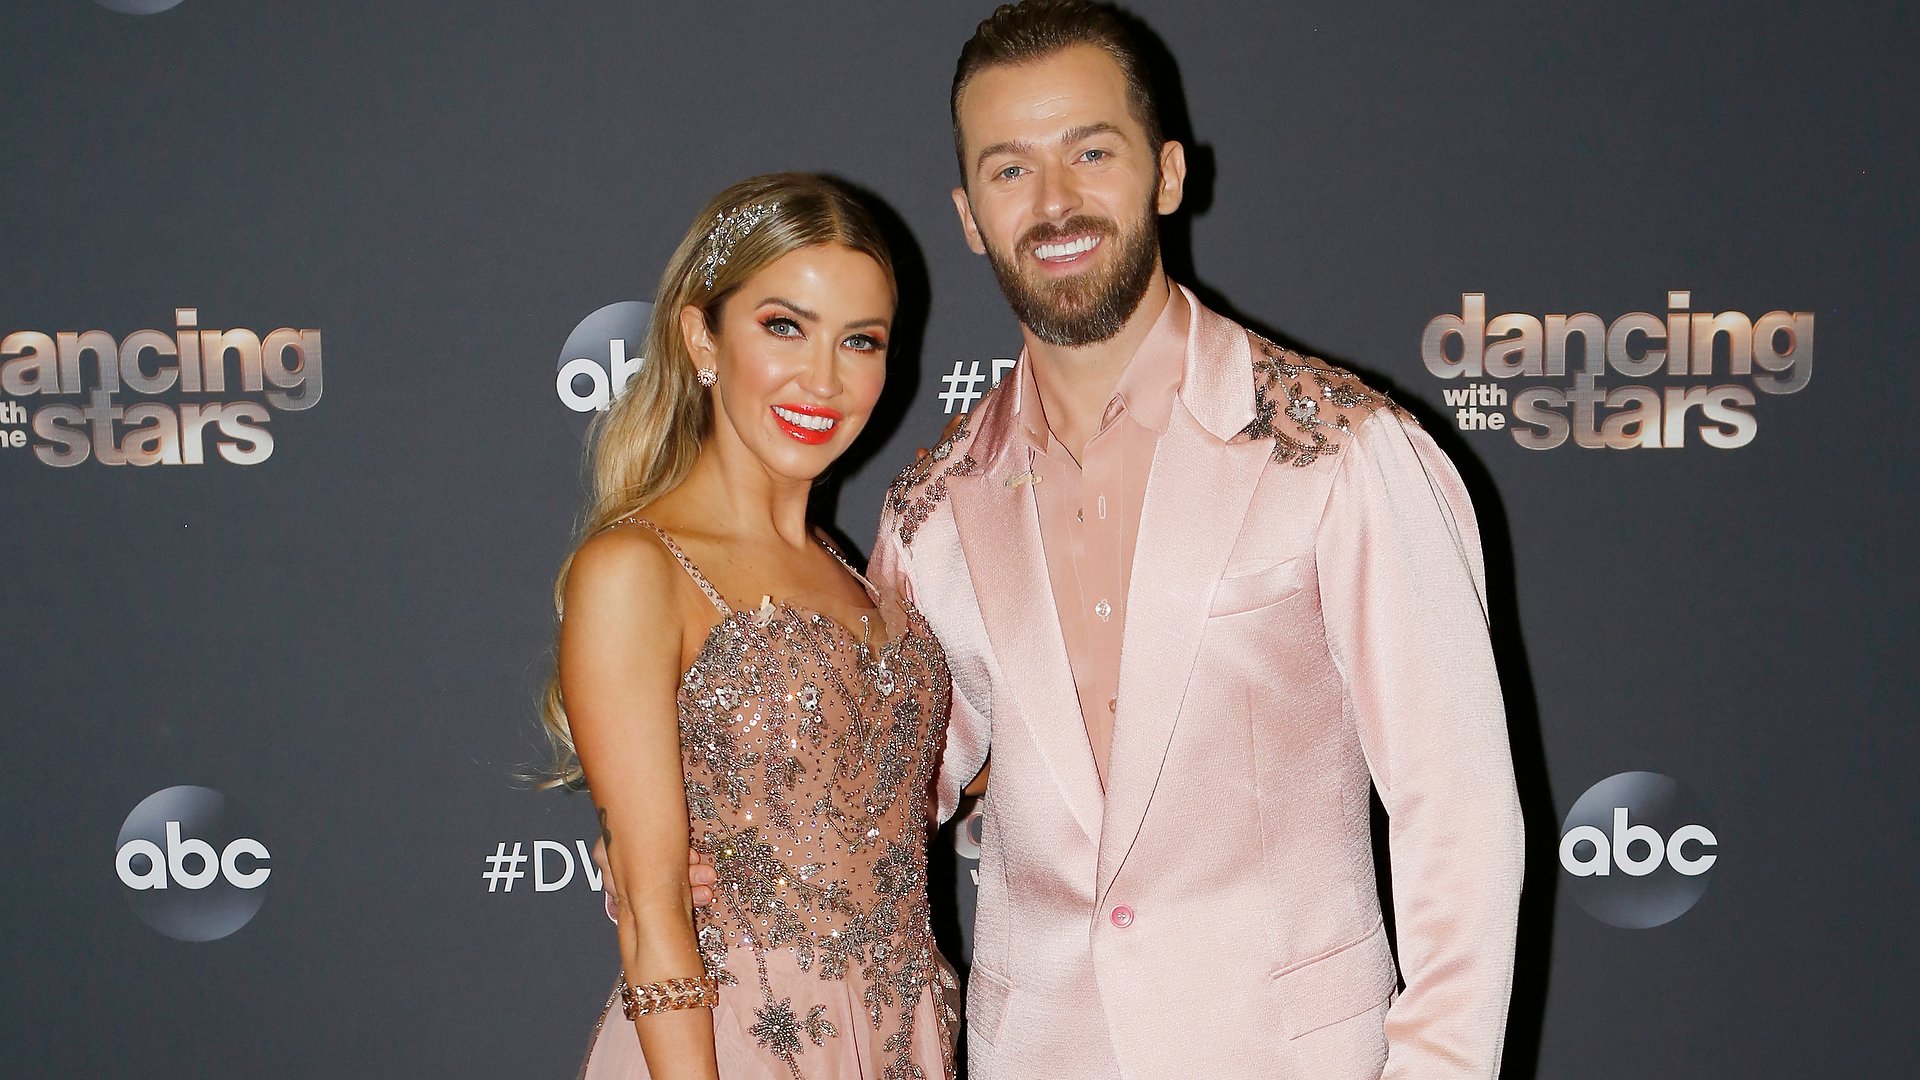 Kaitlyn Bristowe and Artem Chigvintsev from 'Dancing with the Stars' Season 29